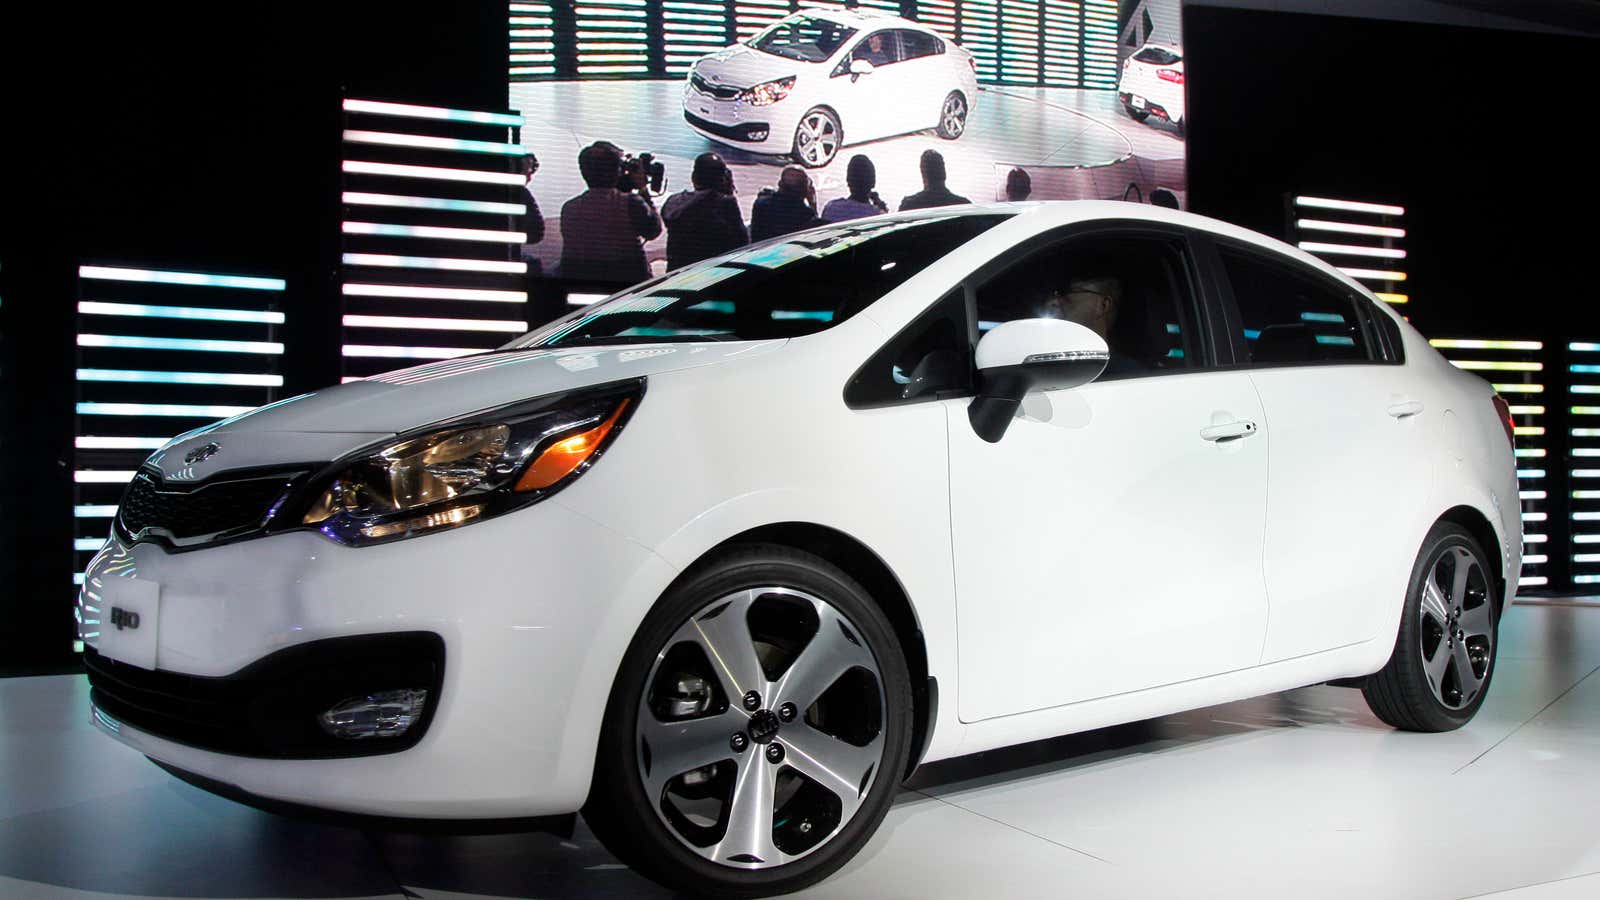 The new Kia Rio is among the many cars getting longer, partly to suit global tastes.